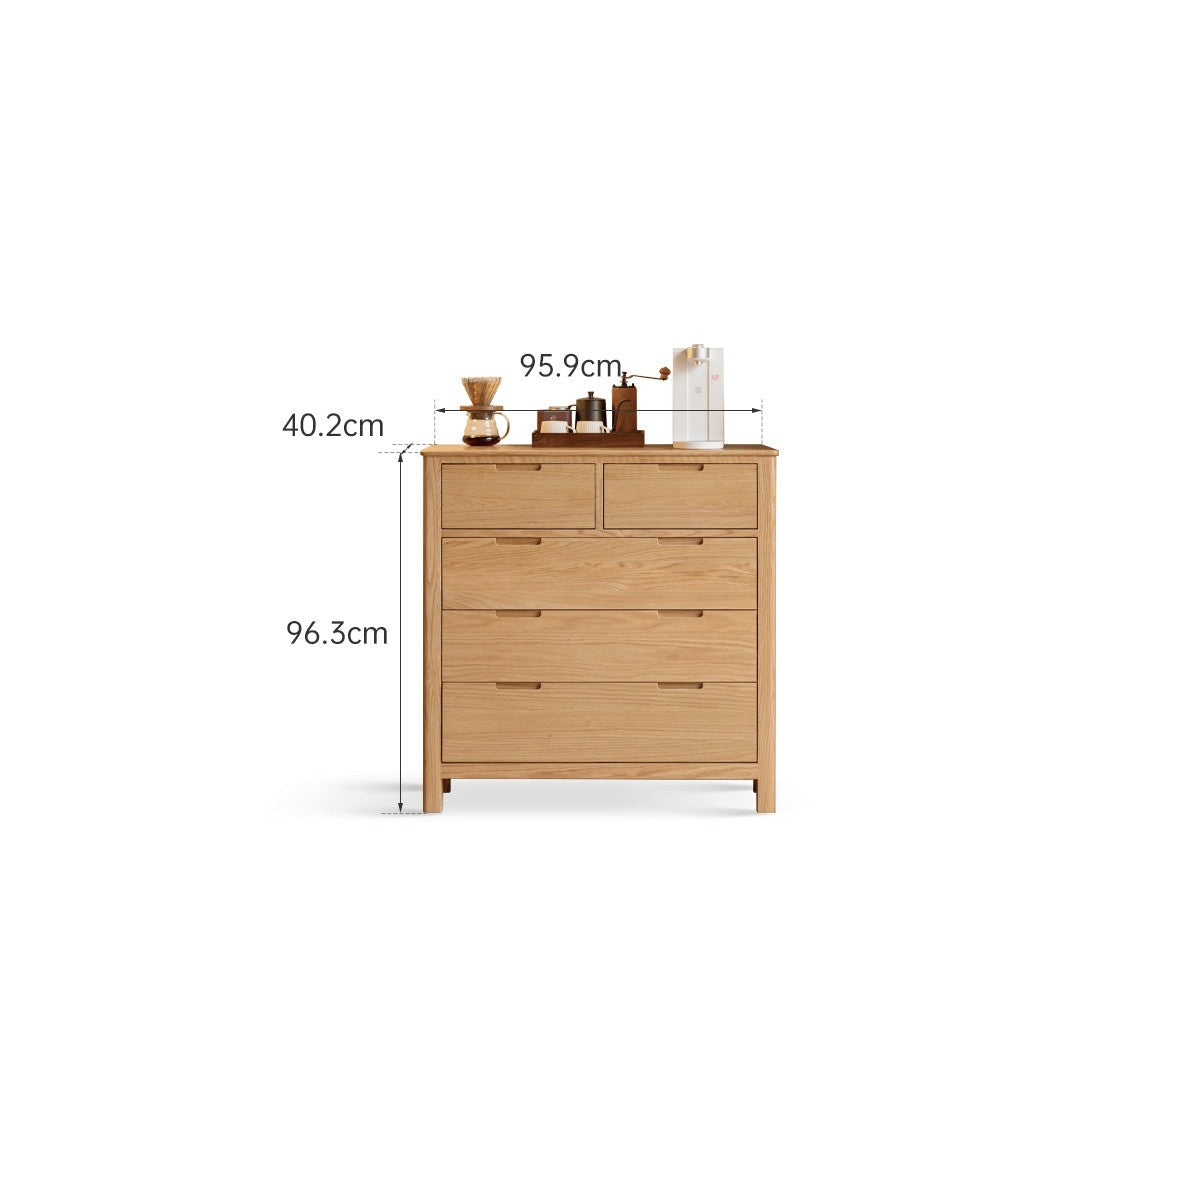 Oak solid wood chest of drawers"